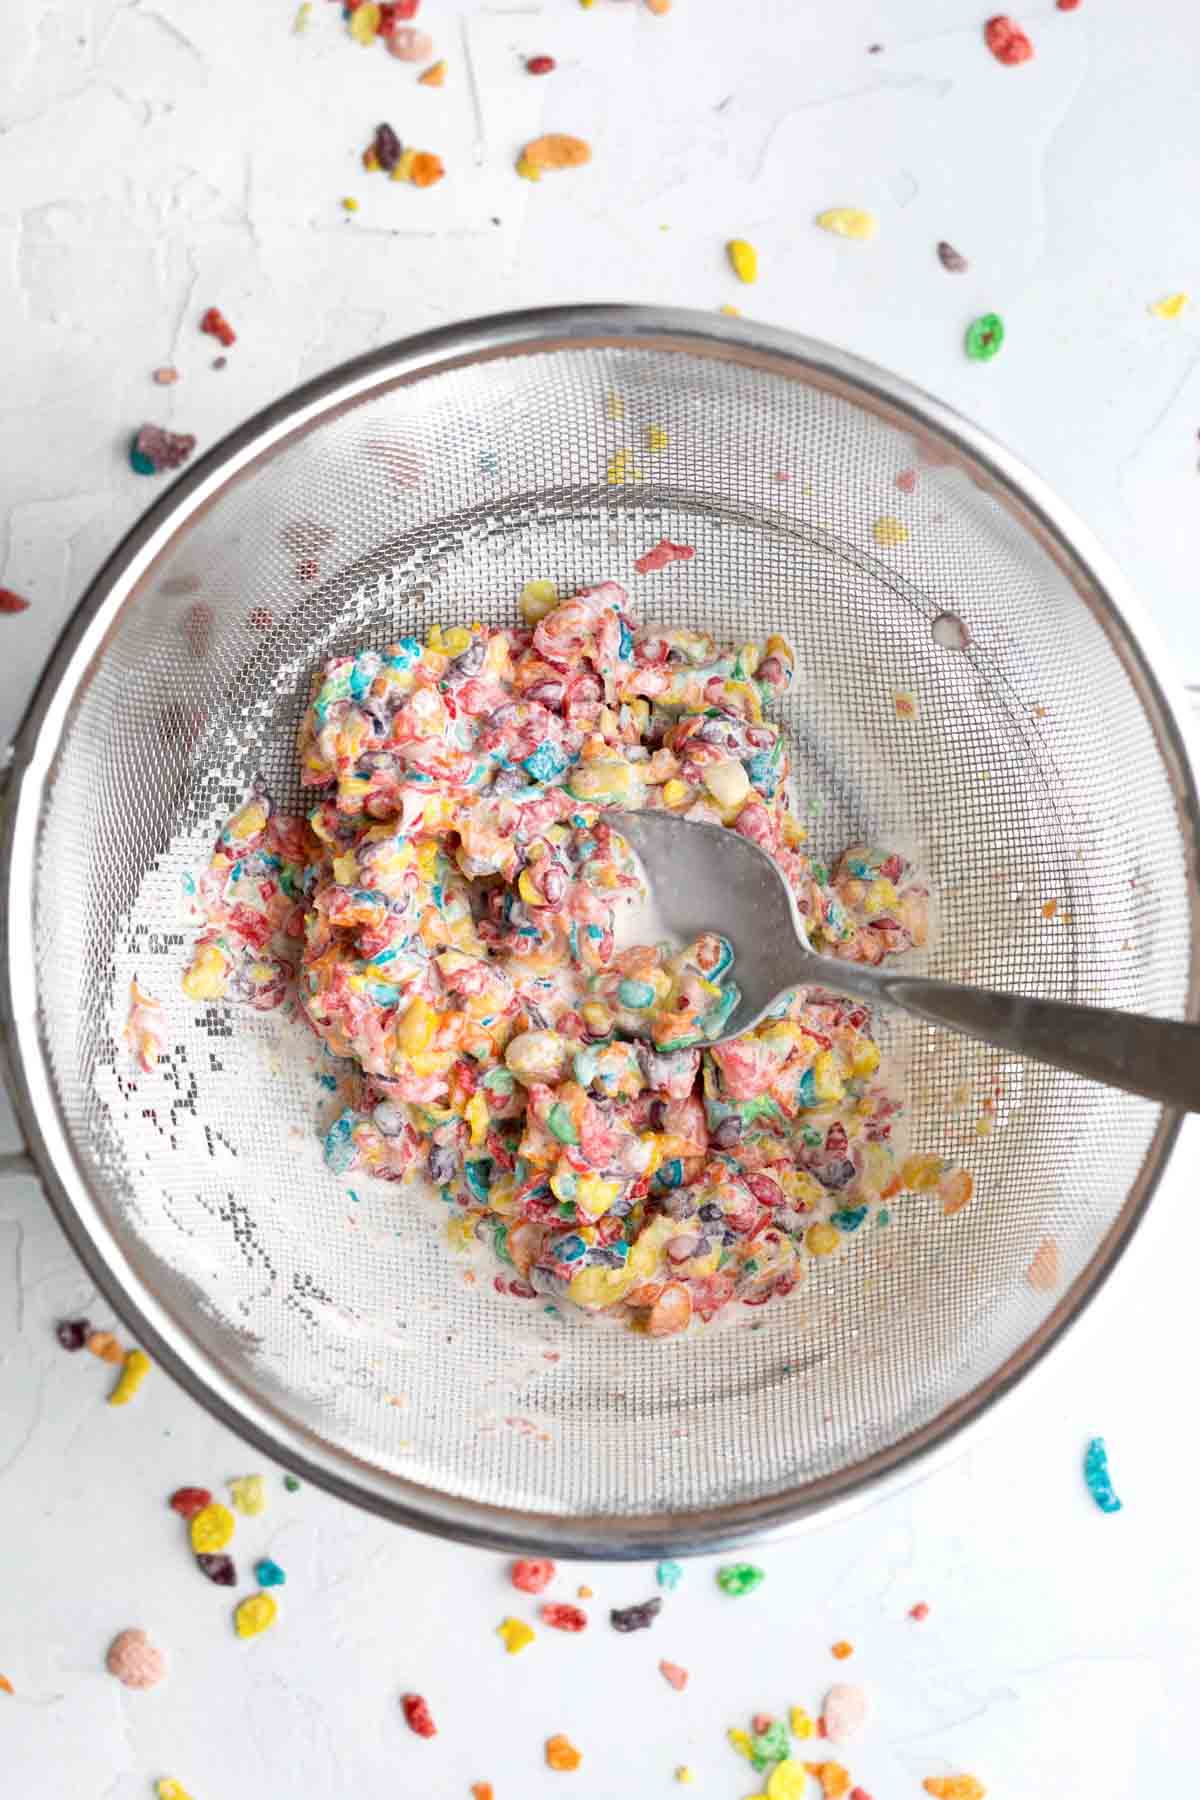 Straining the Fruity Pebbles from the milk.